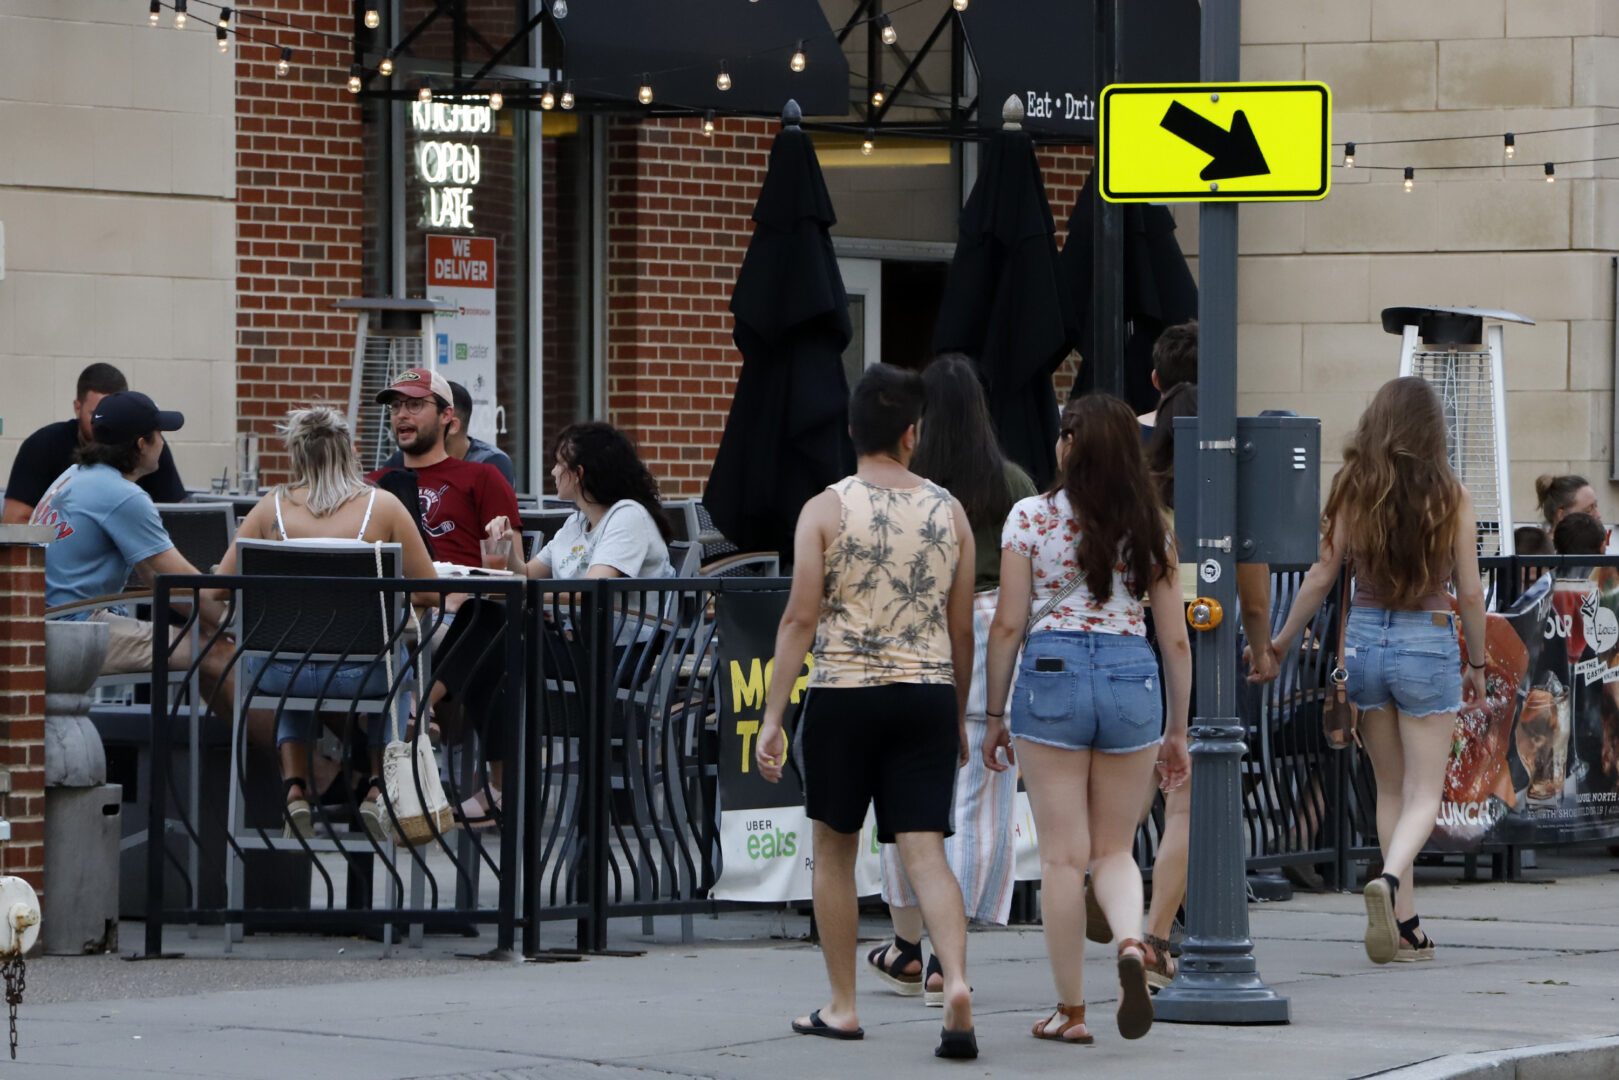 People gather at tables outside Bar Louie on the Northside of Pittsburgh Sunday, June 28, 2020. In response to the recent spike in COVID-19 cases in Allegheny County, health officials are ordering all bars and restaurants in the county to stop the sale of alcohol for on-site consumption beginning on June 30.